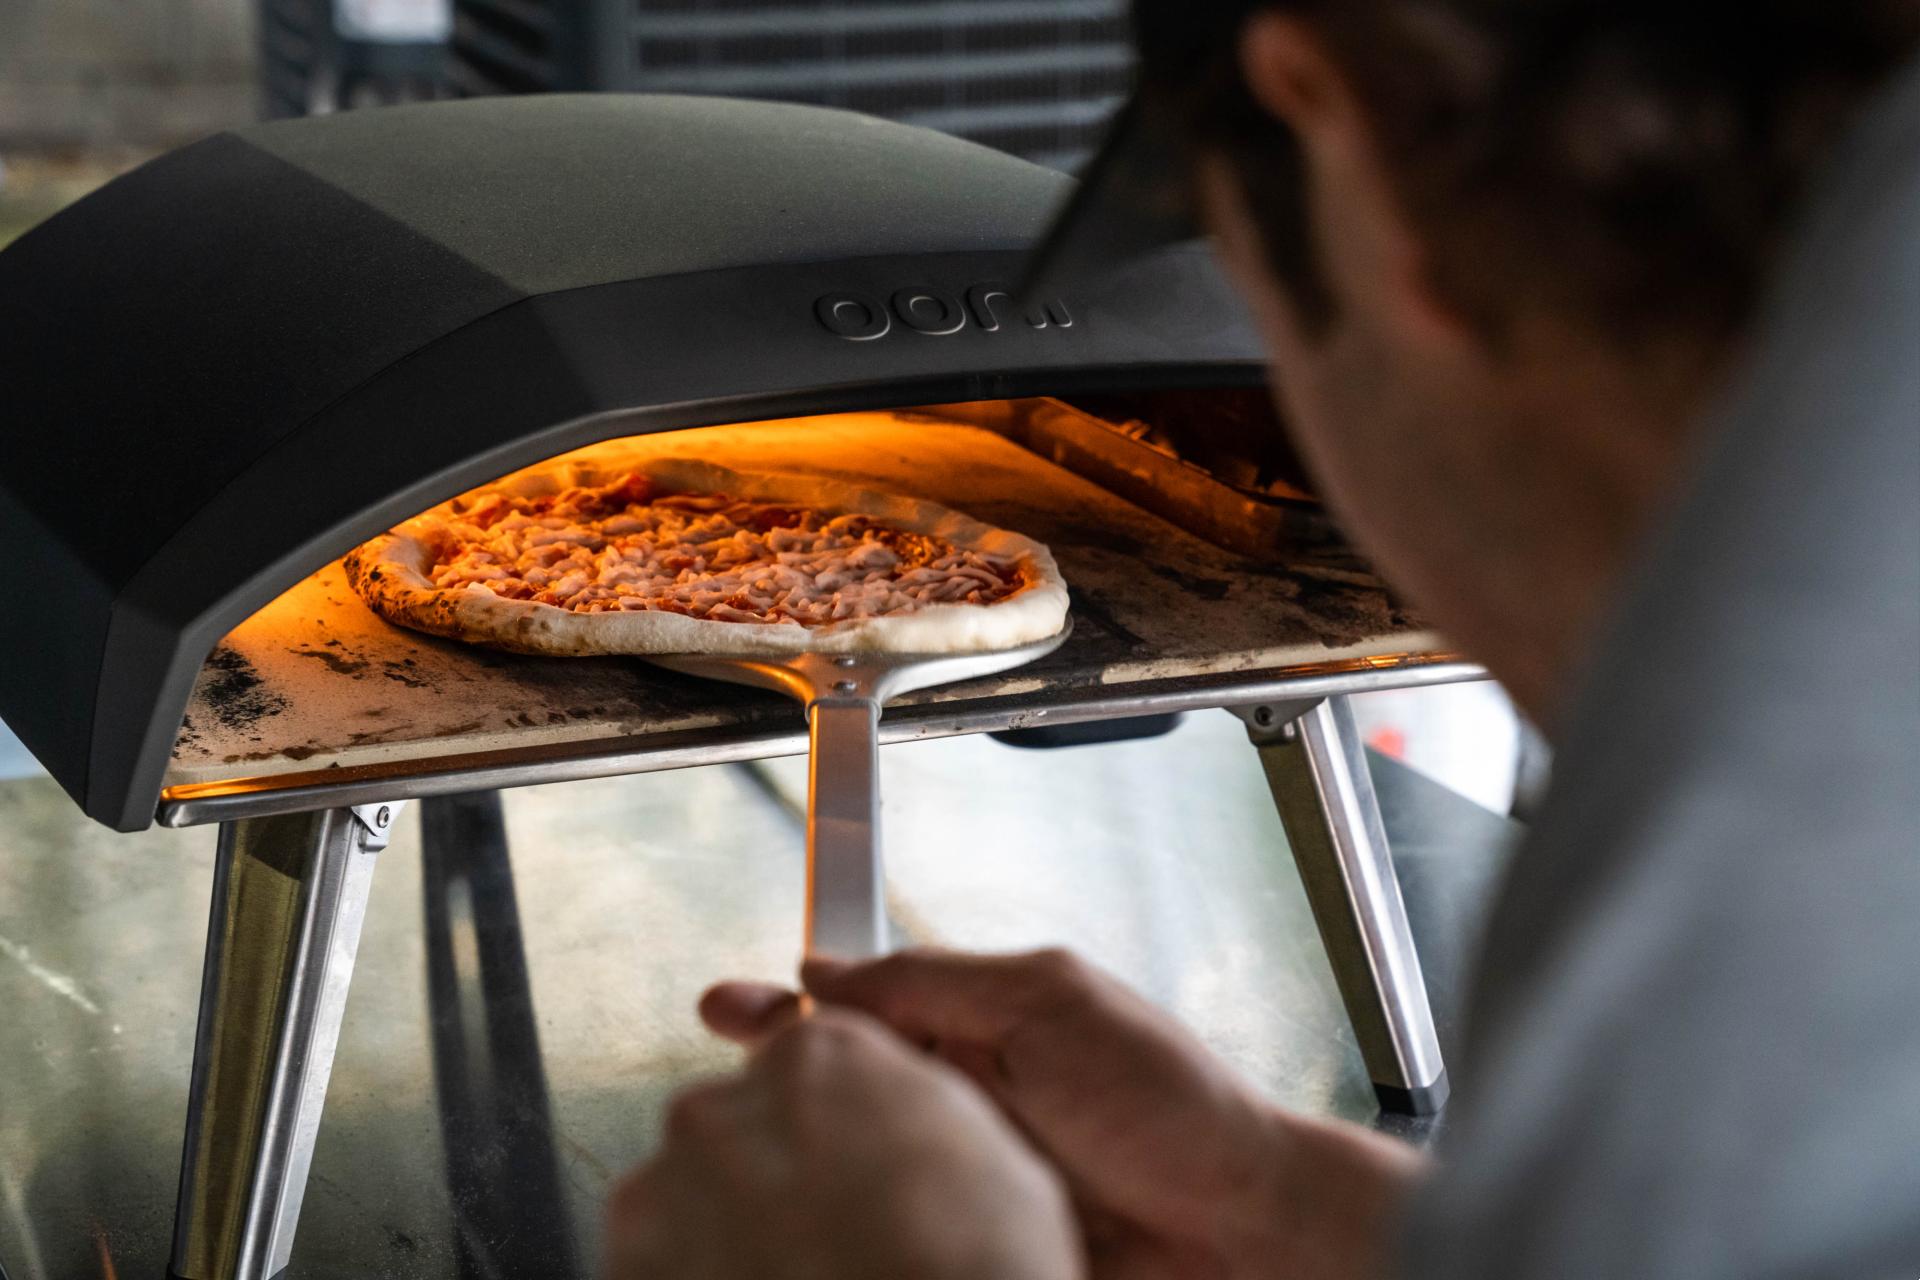 Pizza being put into an Ooni pizza oven with an Ooni pizza peel